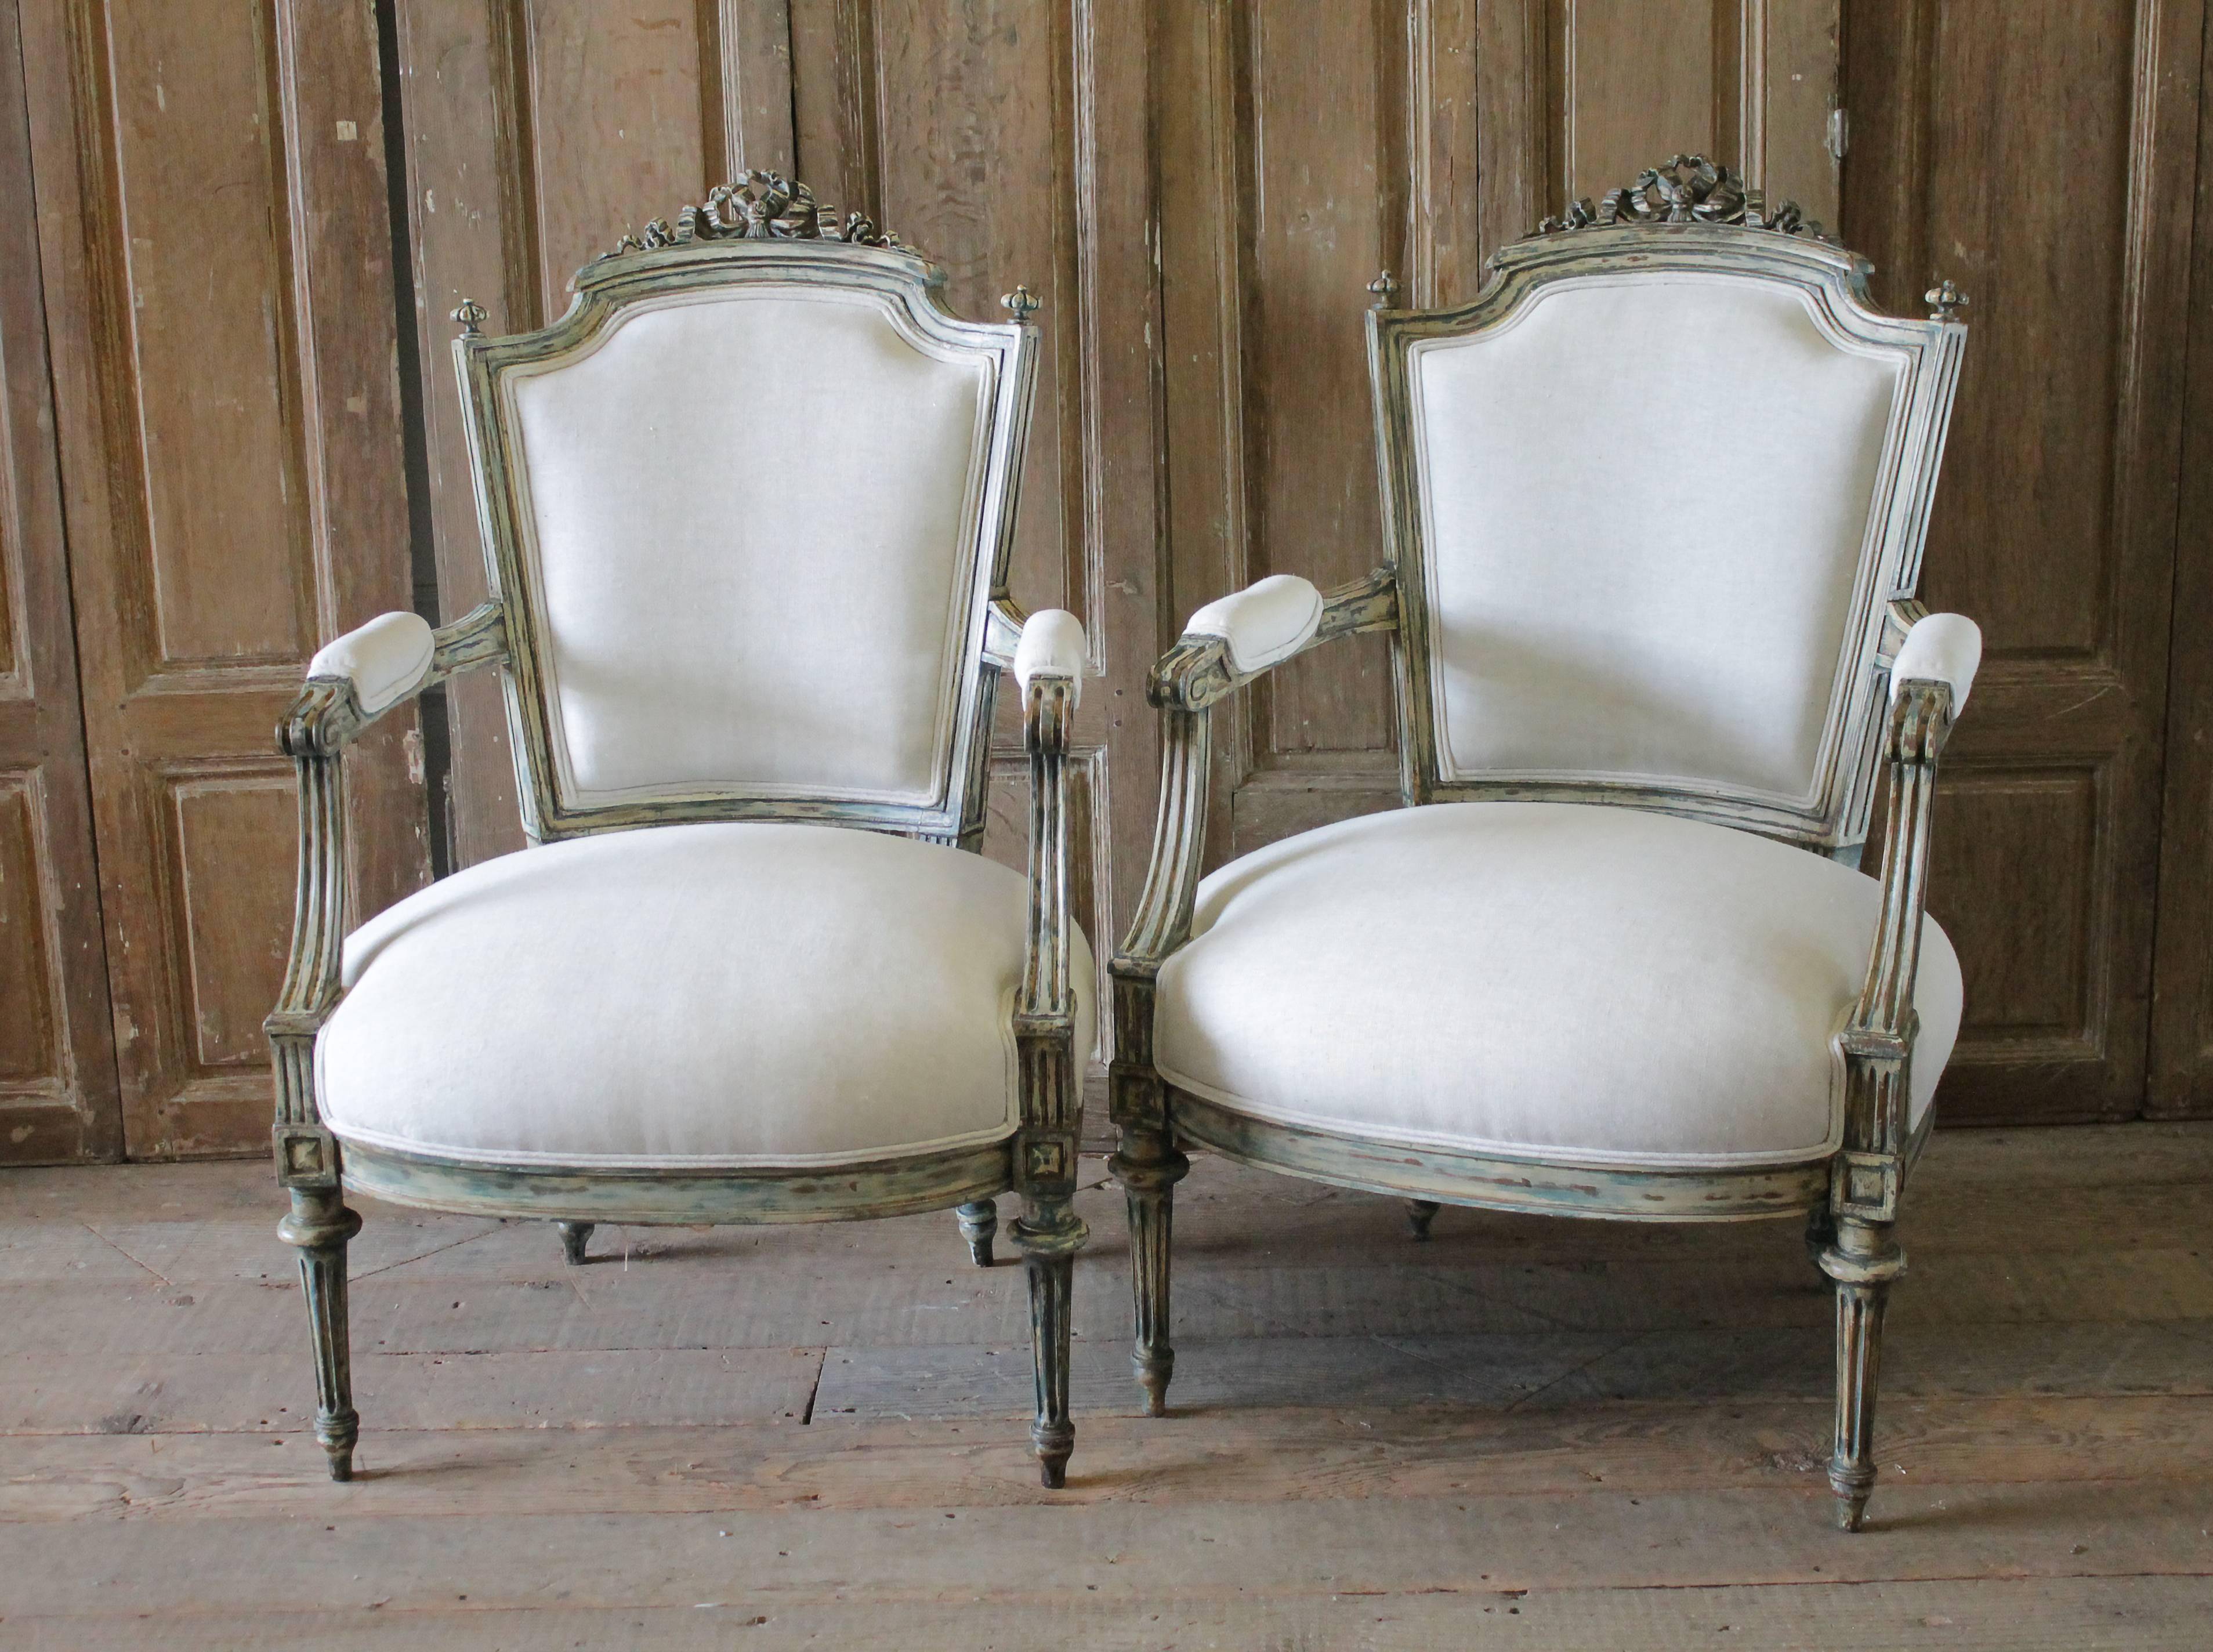 Pair of 19th century painted and upholstered Louis XVI style open armchairs
Beautiful armchairs with distressed weathered patina, paint is as found in a wonderful creamy white and French Aqua color exposing the wood tone underneath. The chairs have